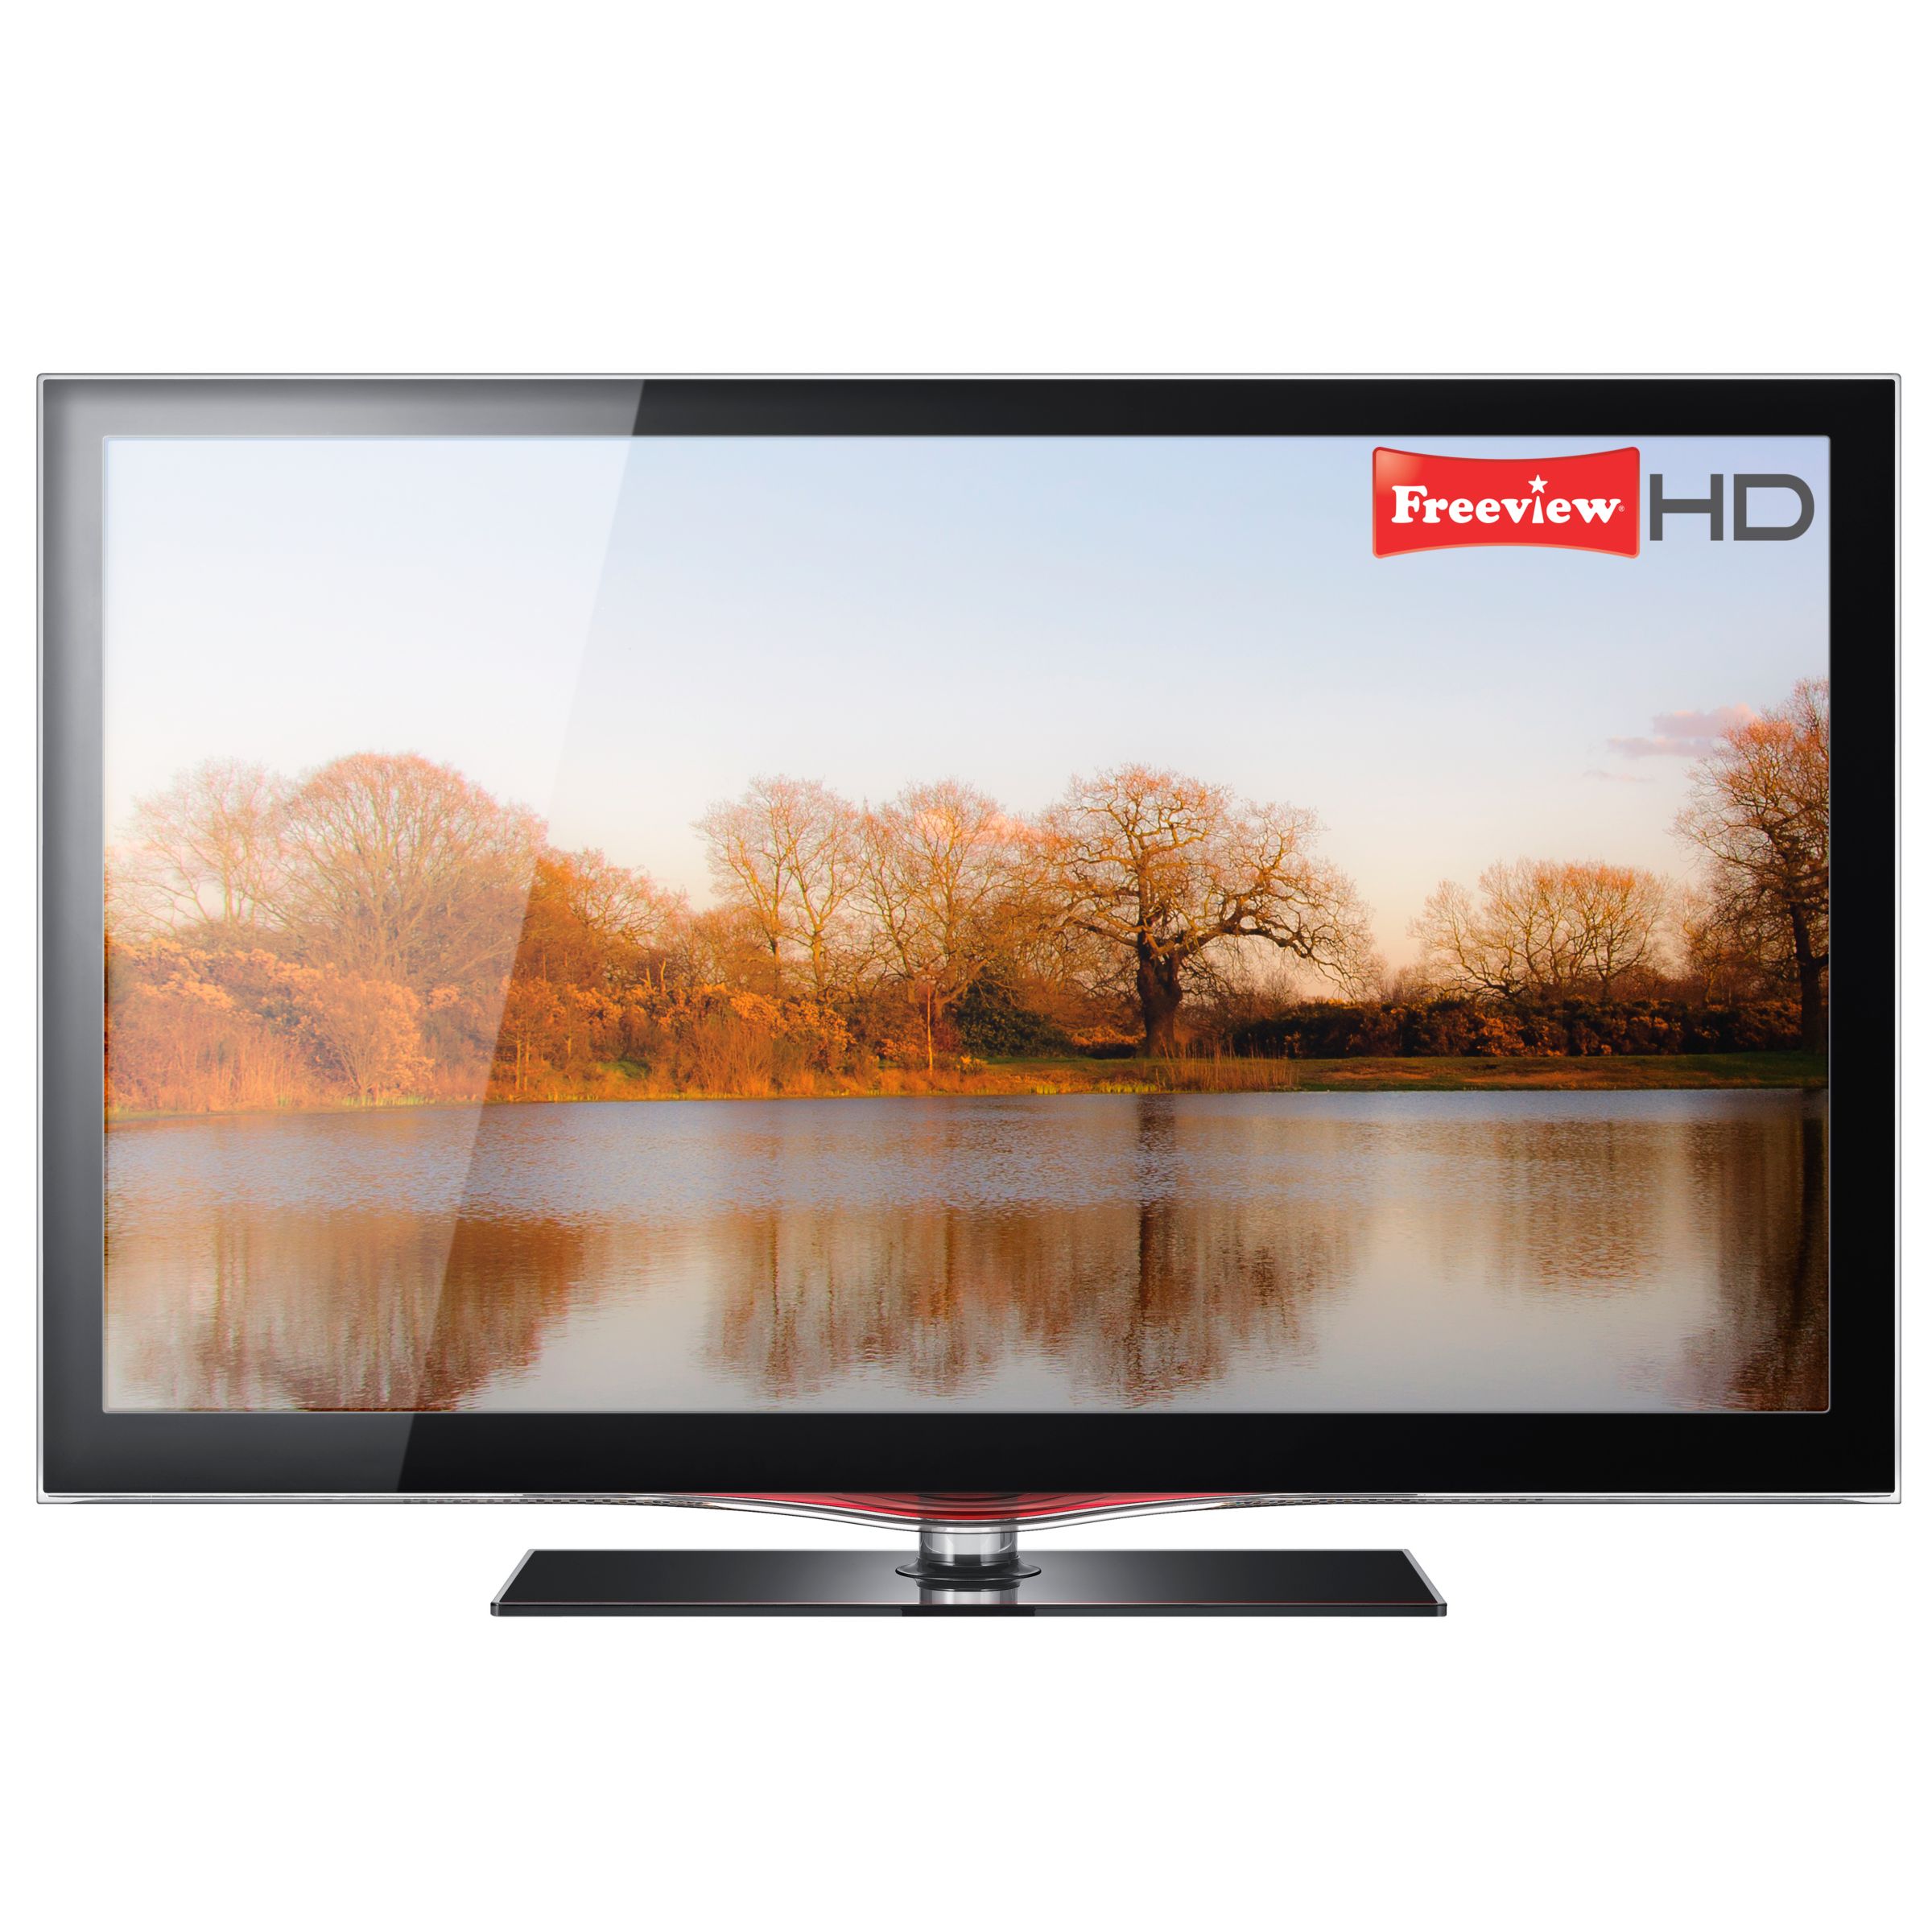 Samsung LE40C650L LCD HD 1080p Digital Television, 40 Inch with Built-in Freeview HD at JohnLewis